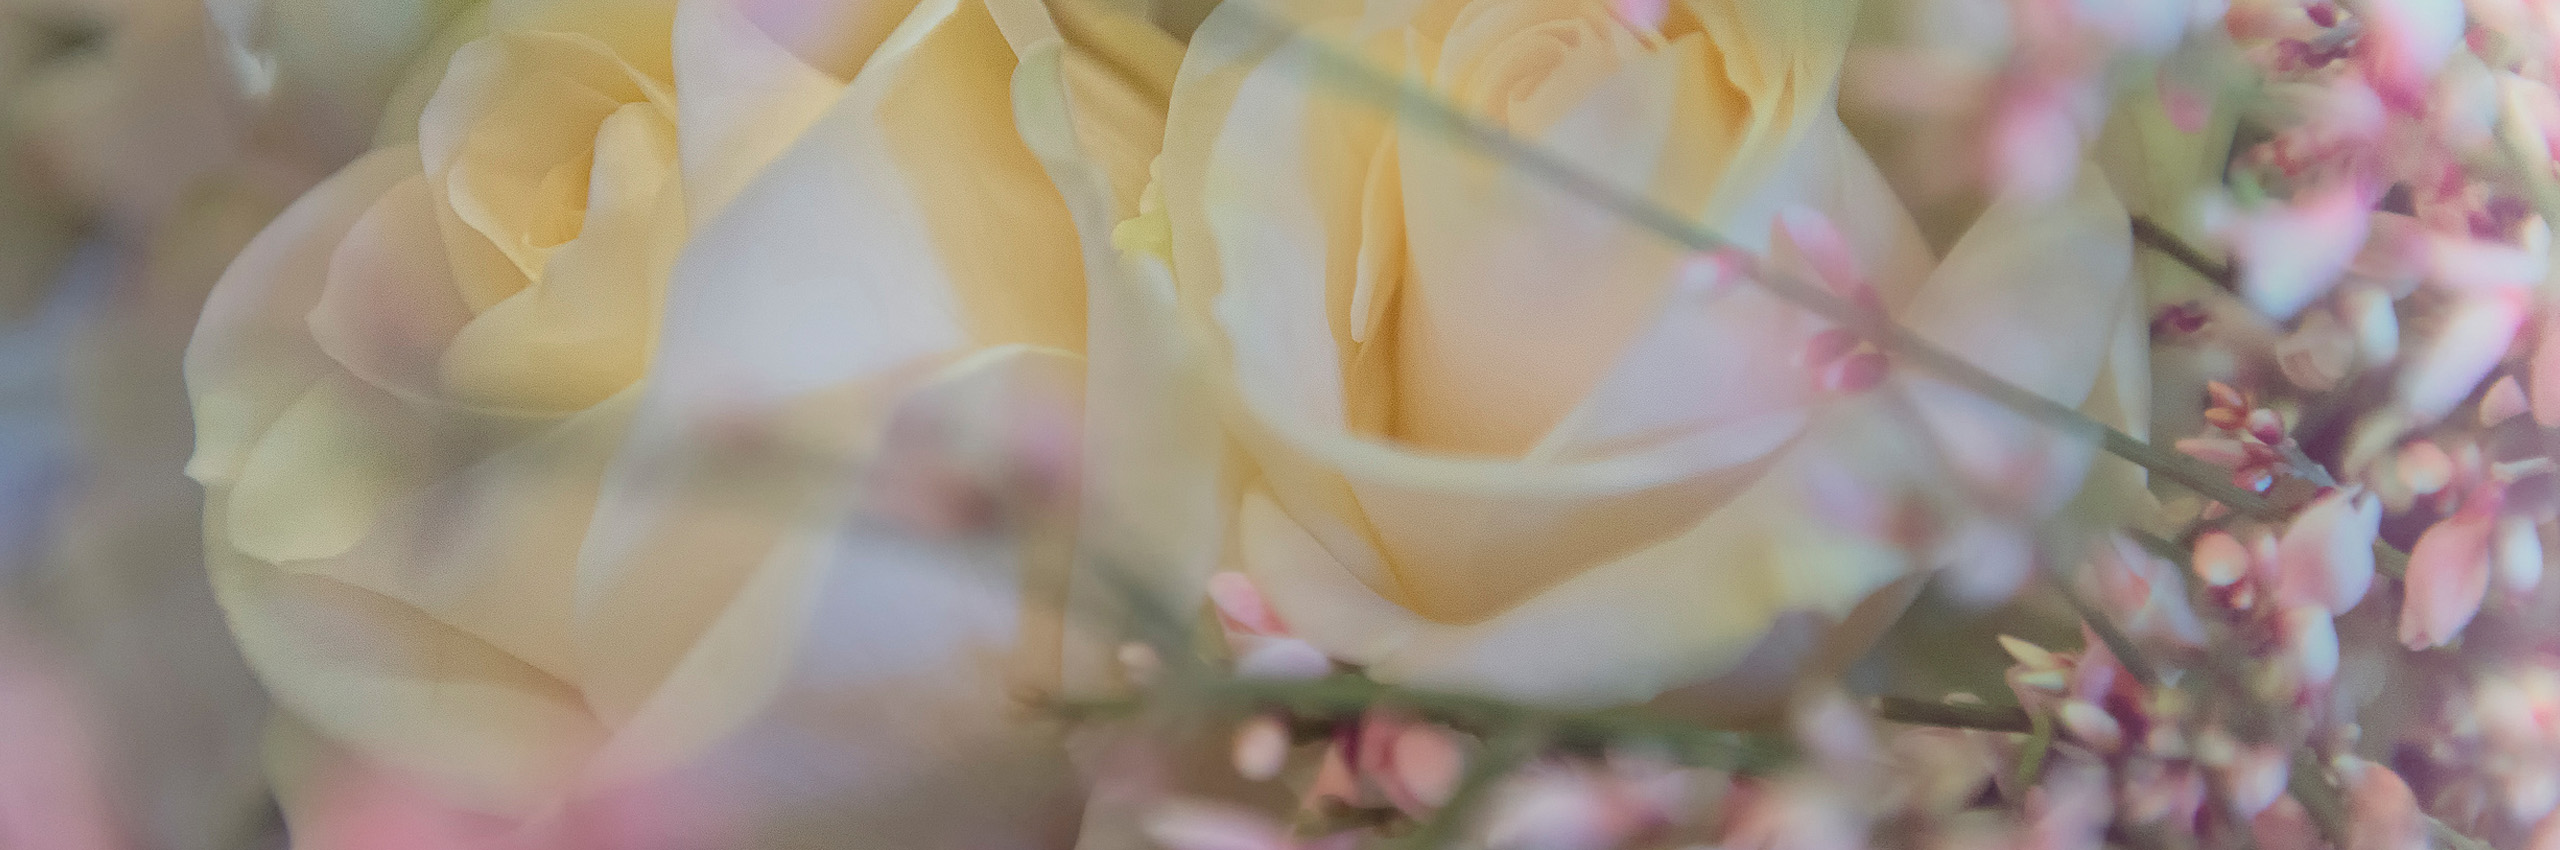 41268426 | Bouquet with white roses | © Heidi Bollich/HUBER IMAGES